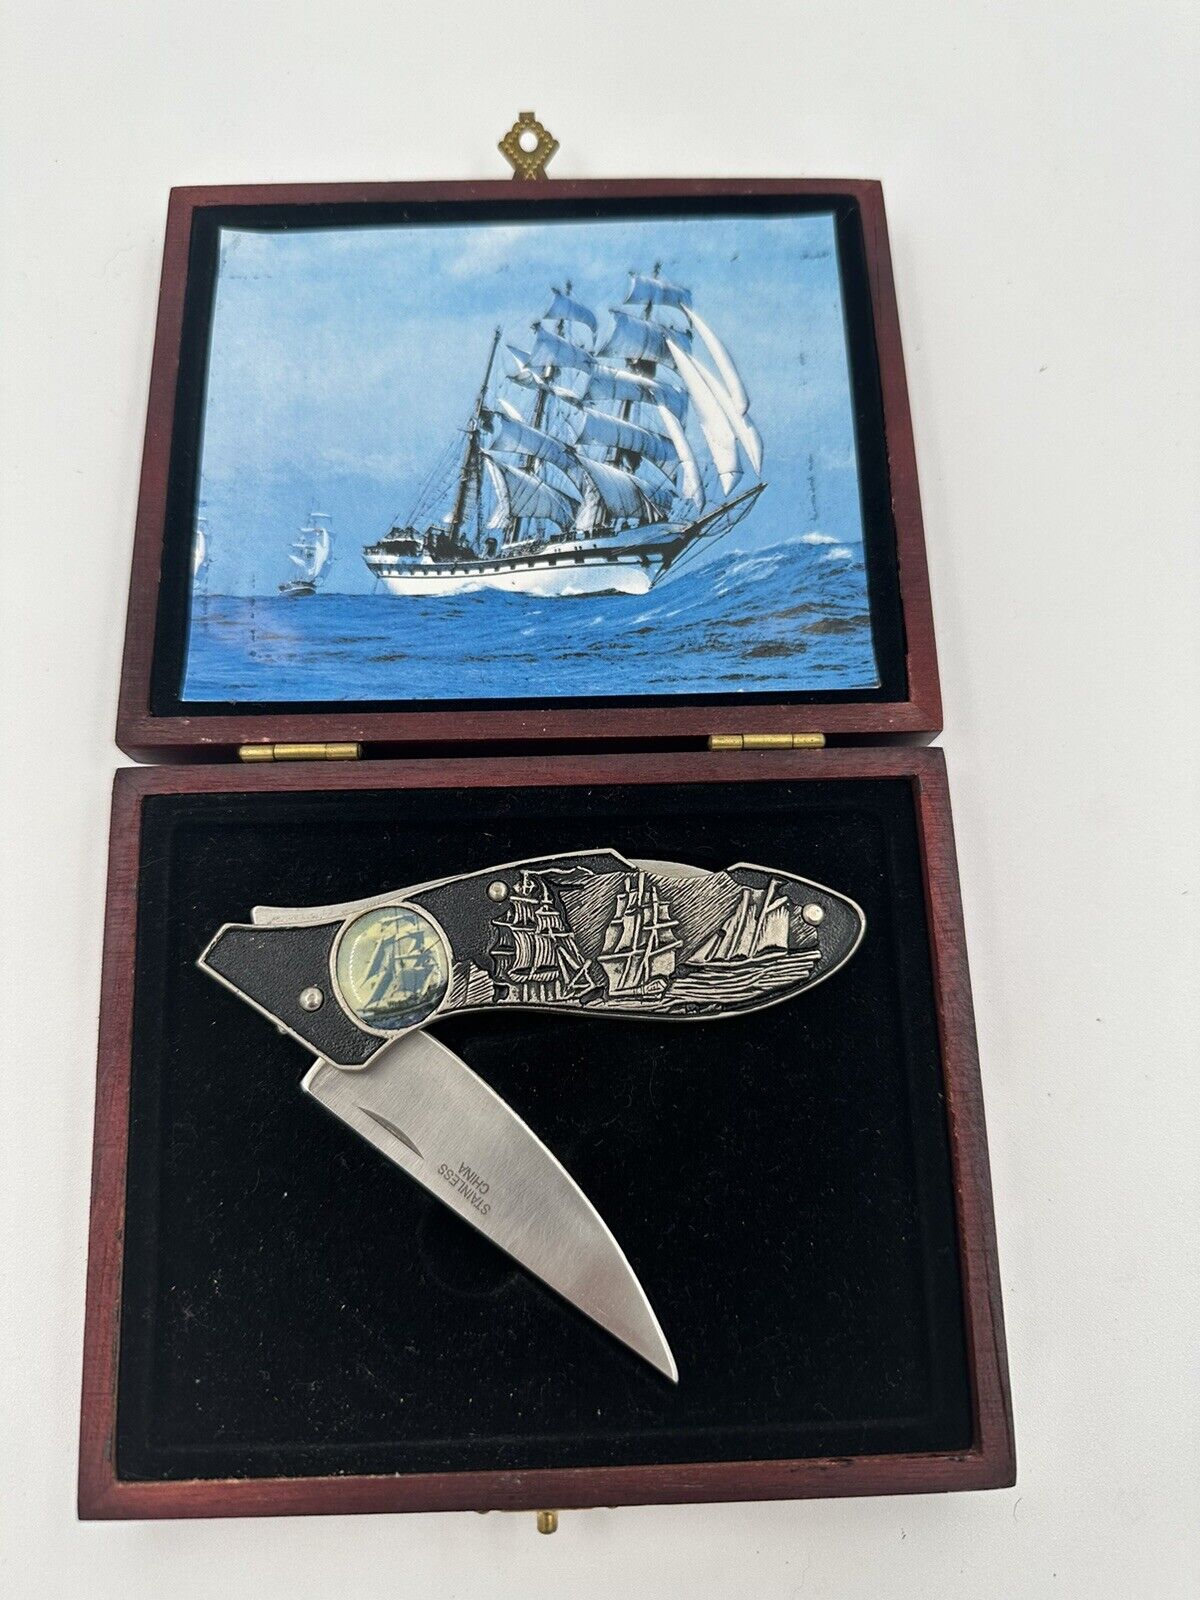 Limited Edition Hautman Brothers Collectible Knife